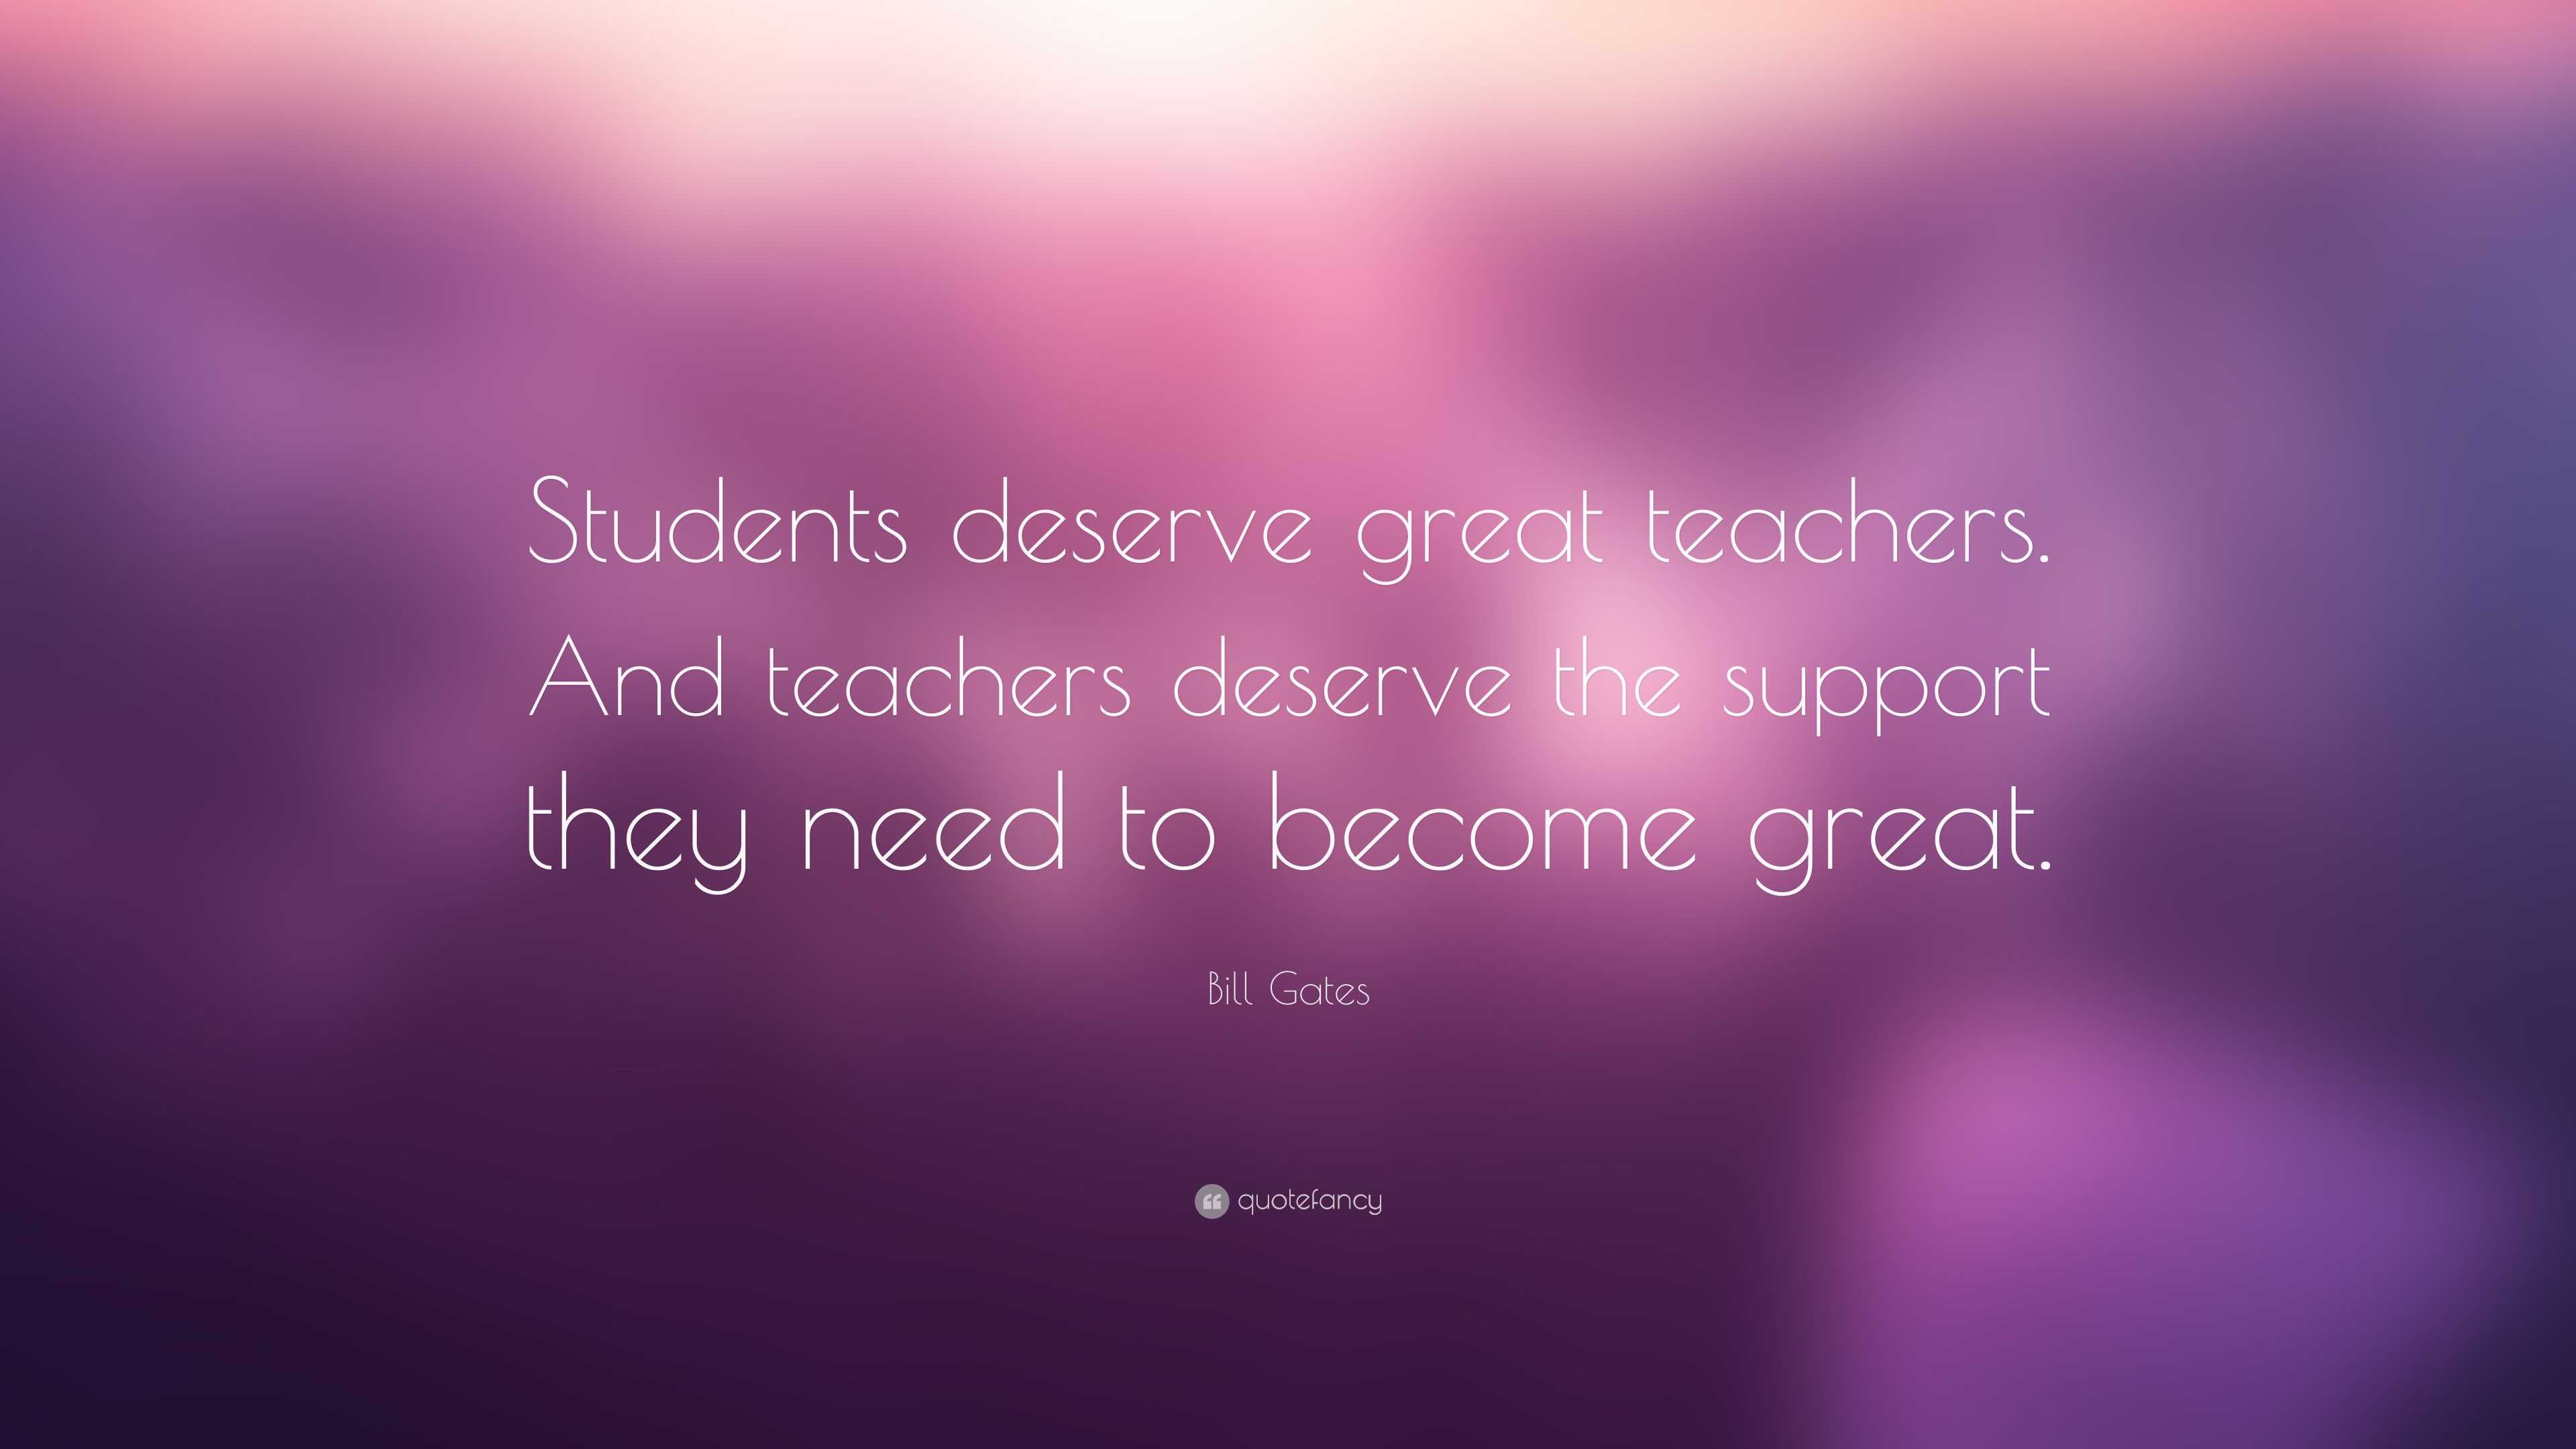 Bill Gates Quote: “Students deserve great teachers. And teachers ...